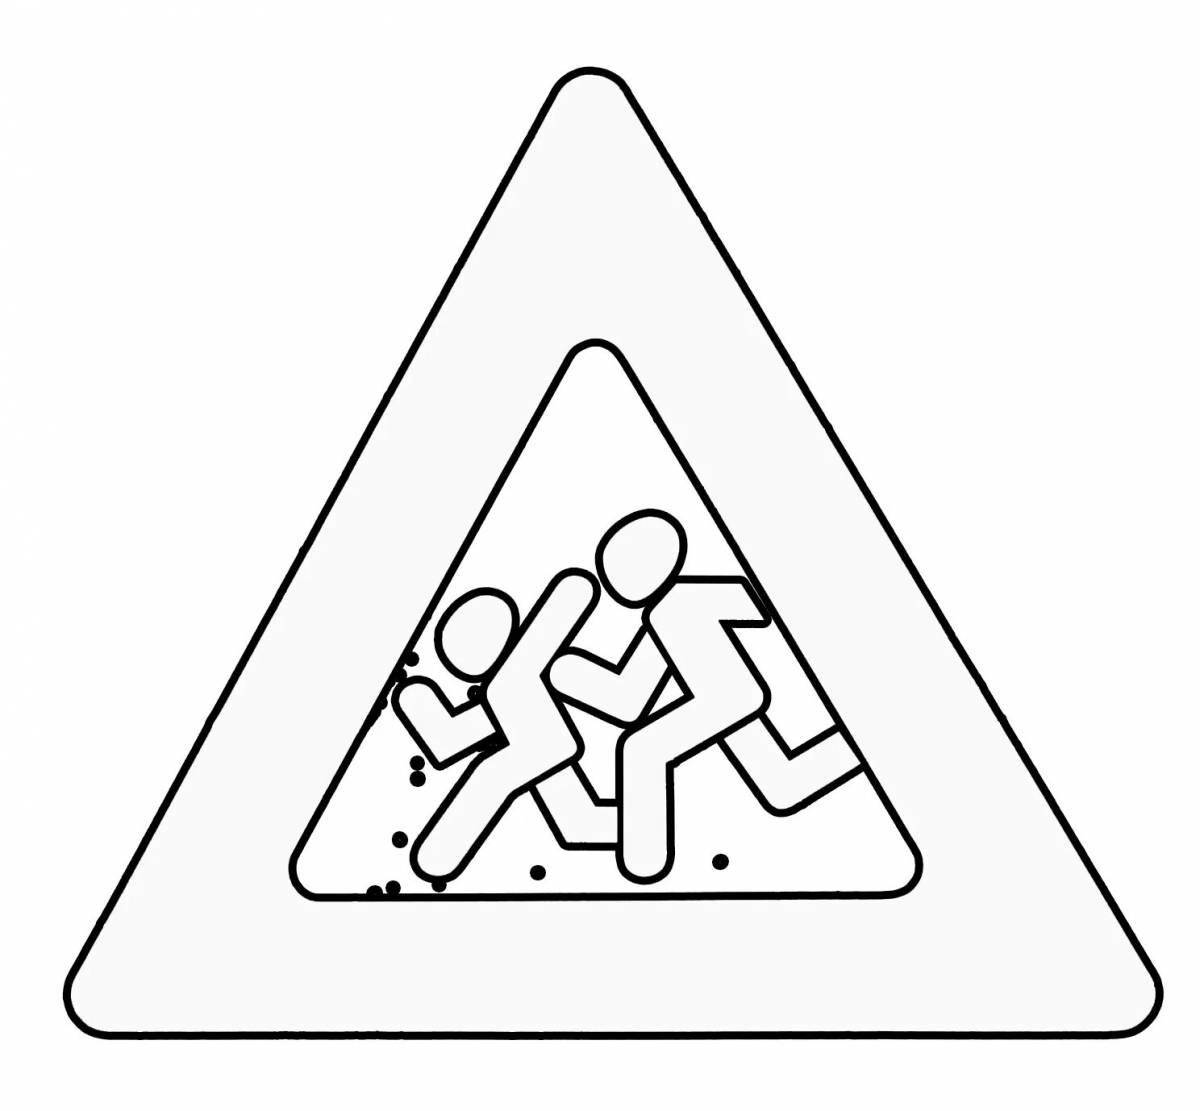 Vibrant road signs coloring pages for preschoolers